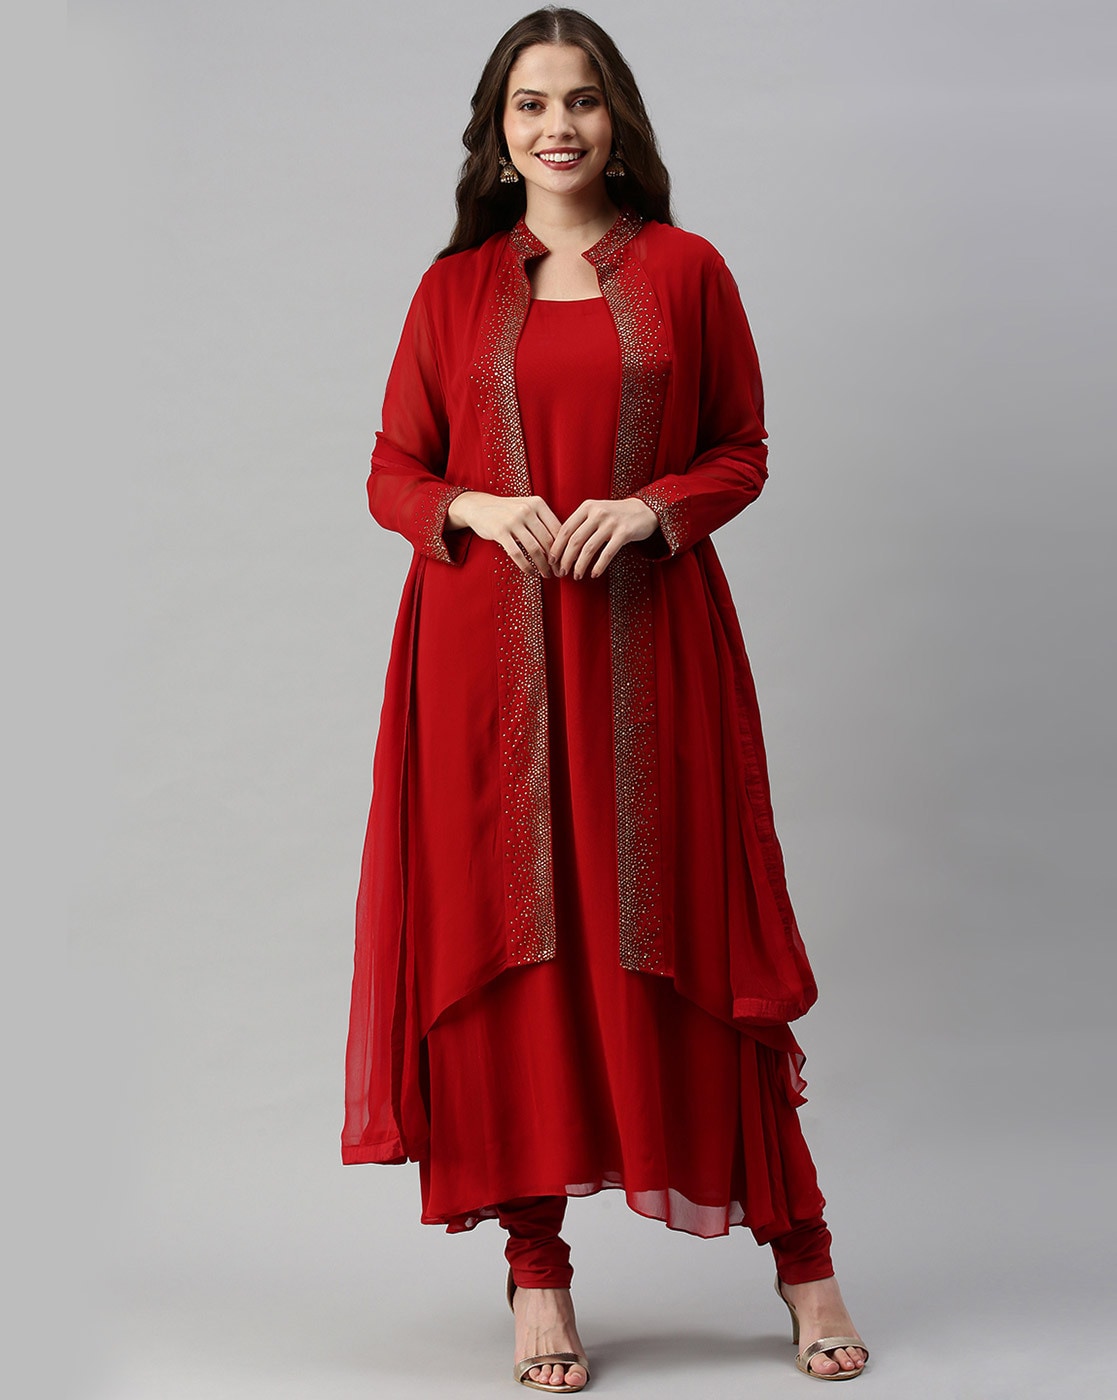 Soch - Stand out on every occasion with ethnic collections that define you.  Likhita has picked out her elegant pick from Soch. Pick your favourite Kurti  Suits, Salwar Suits and Sarees from